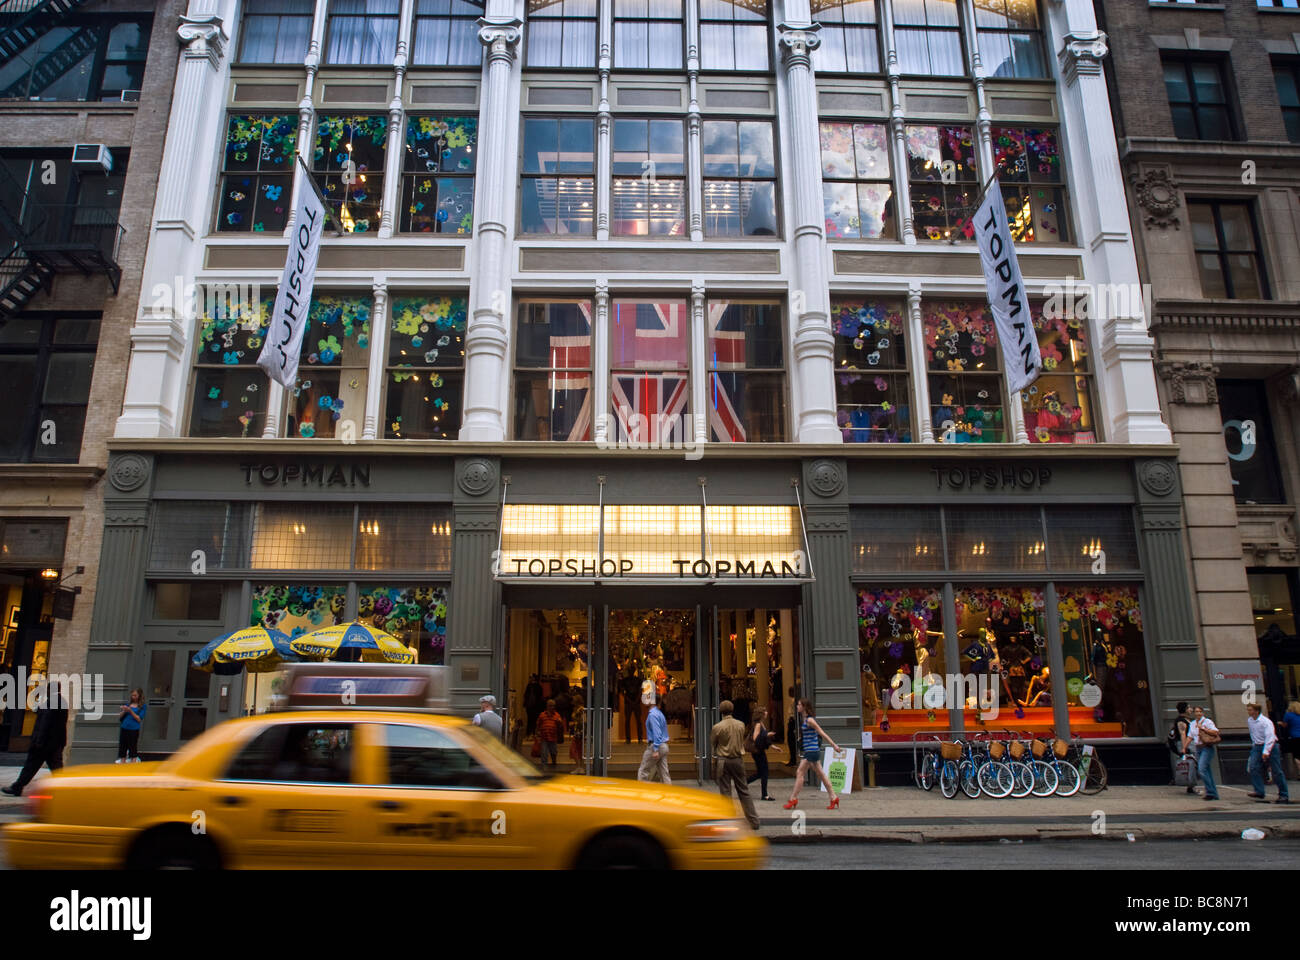 The Topshop store in the neighborhood of Soho in New York Stock Photo -  Alamy